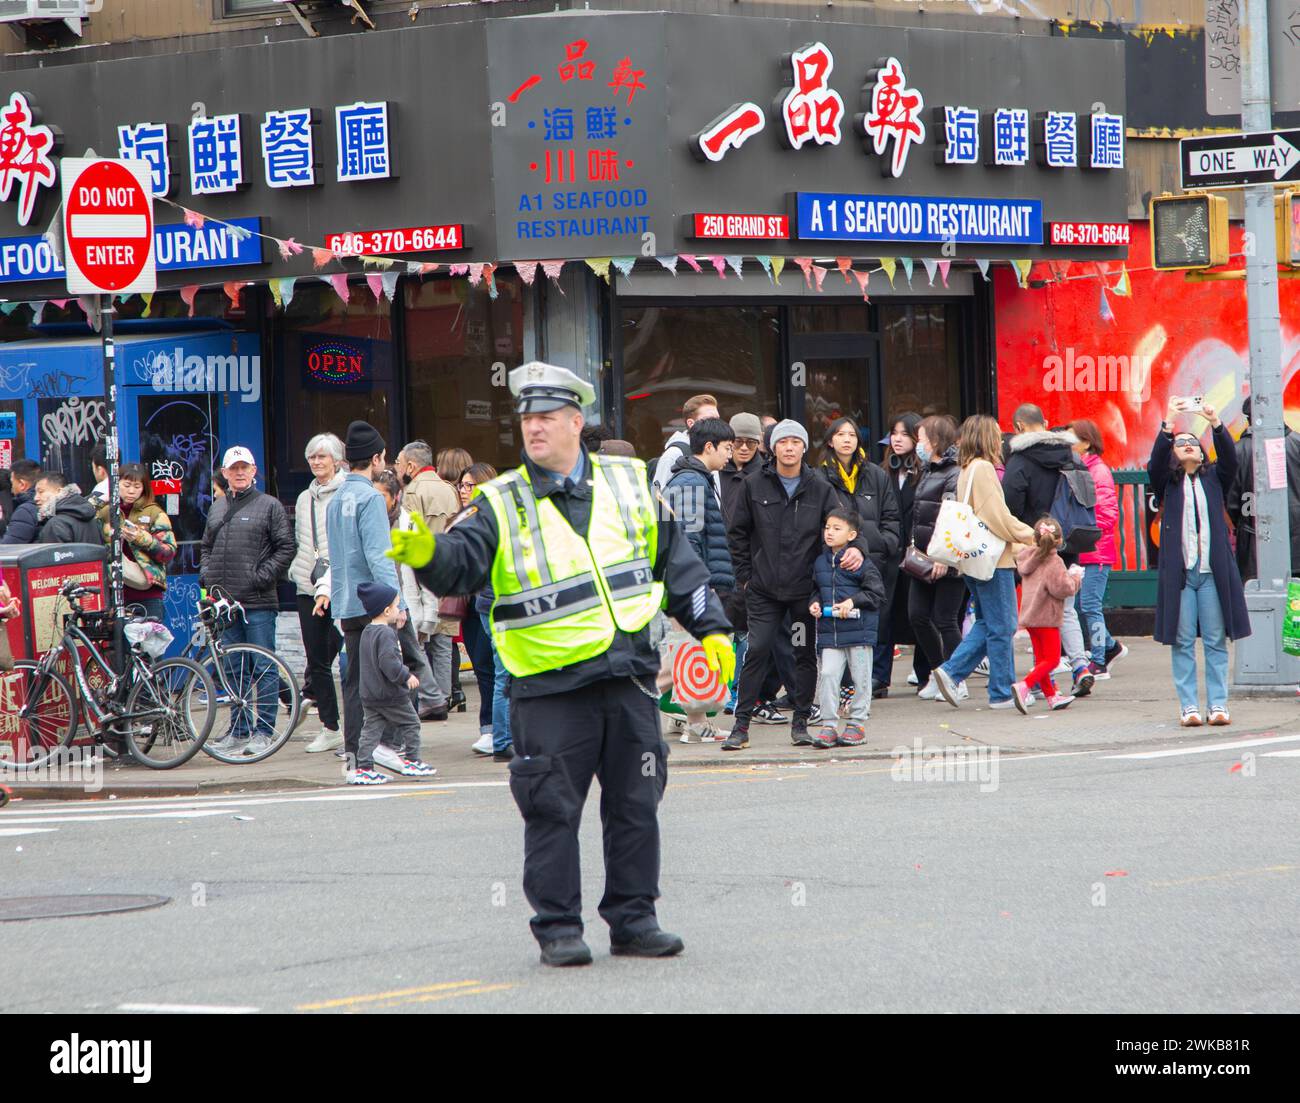 NYPD Traffic Cop directing traffic in Chinatown during Chinese New Year in Manhattan, New York City. Stock Photo